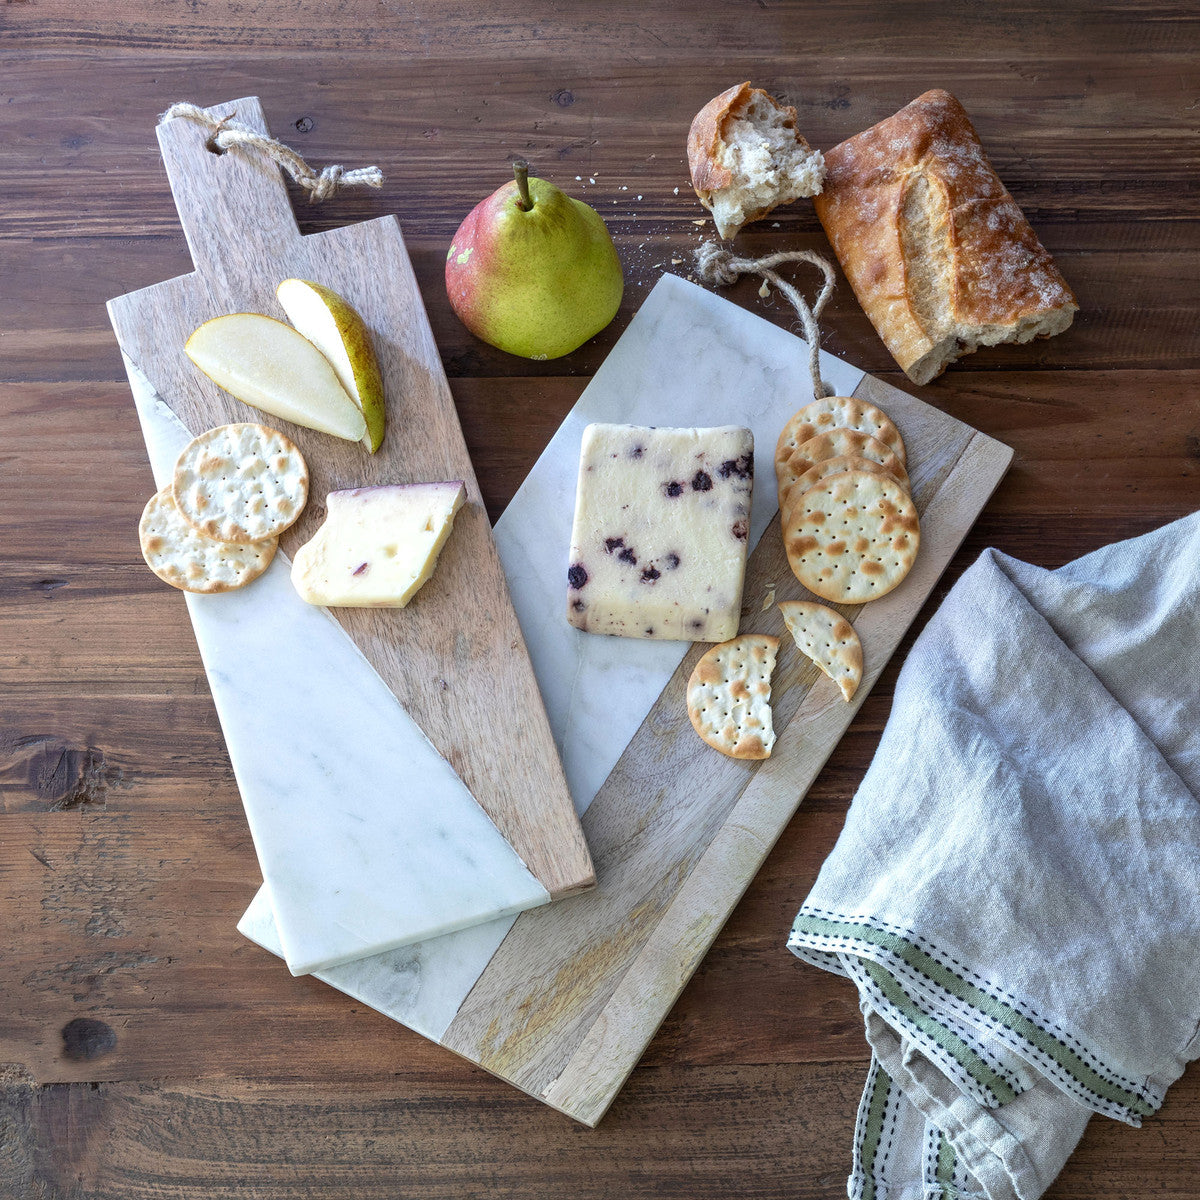 Wood and Marble Cutting Boards